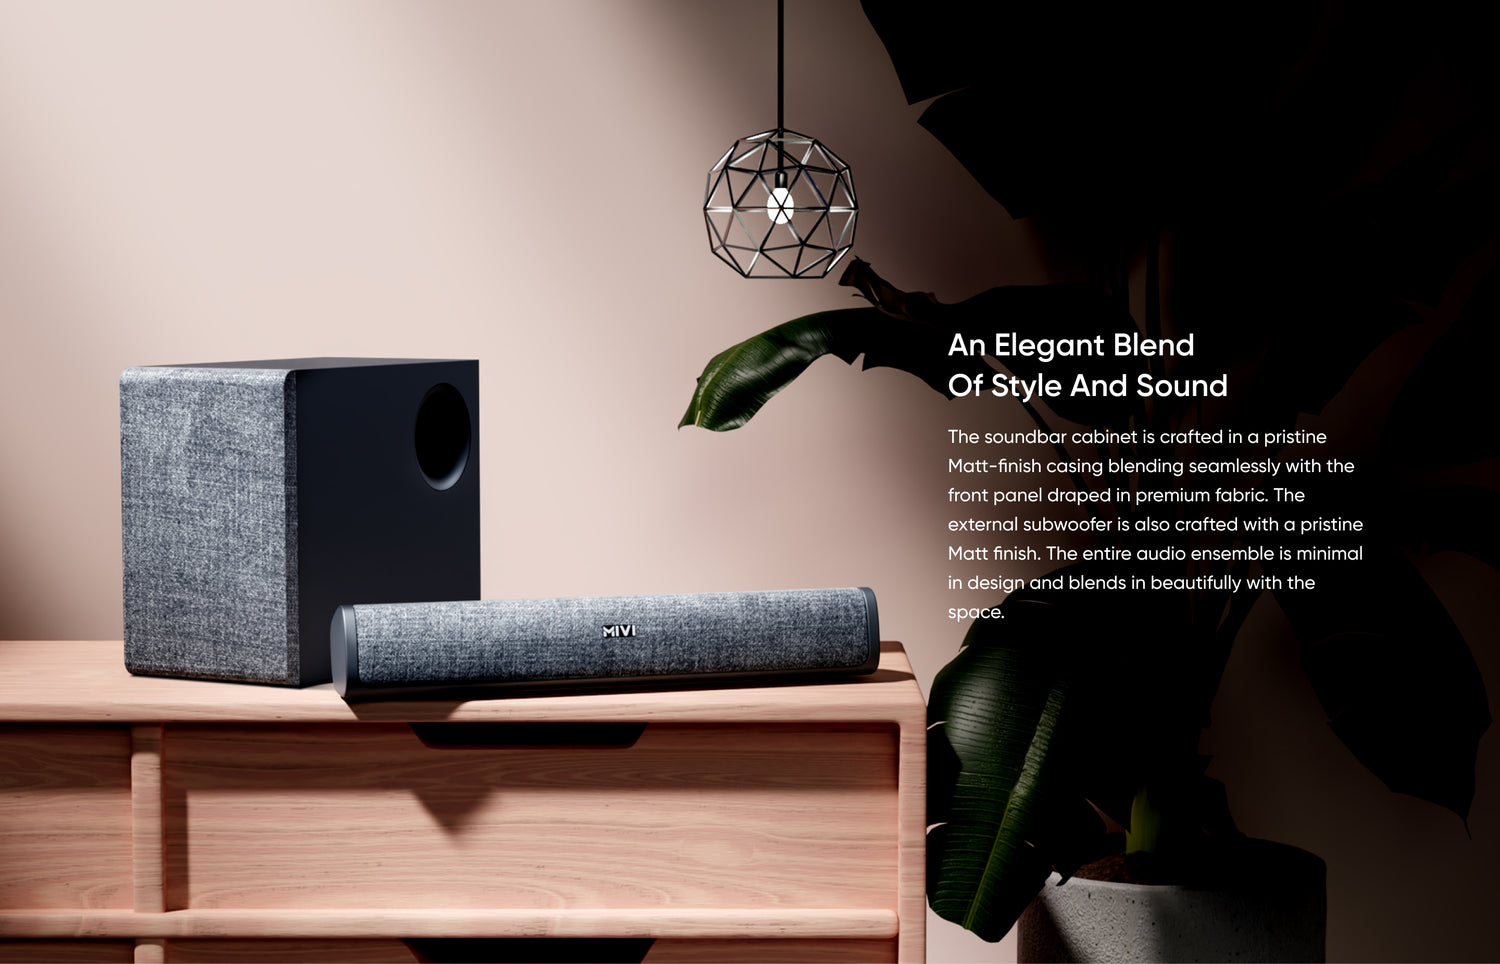 An Elegant Blend of Style and Sound - The soundbar cabinet is crafted in a pristine Matt-finish casing blending seamlessly with the front panel draped in premium fabric. The external subwoofer is also crafted with a pristine Matt finish. The entire audio ensemble is minimal in design and blends in beautifully with the space.